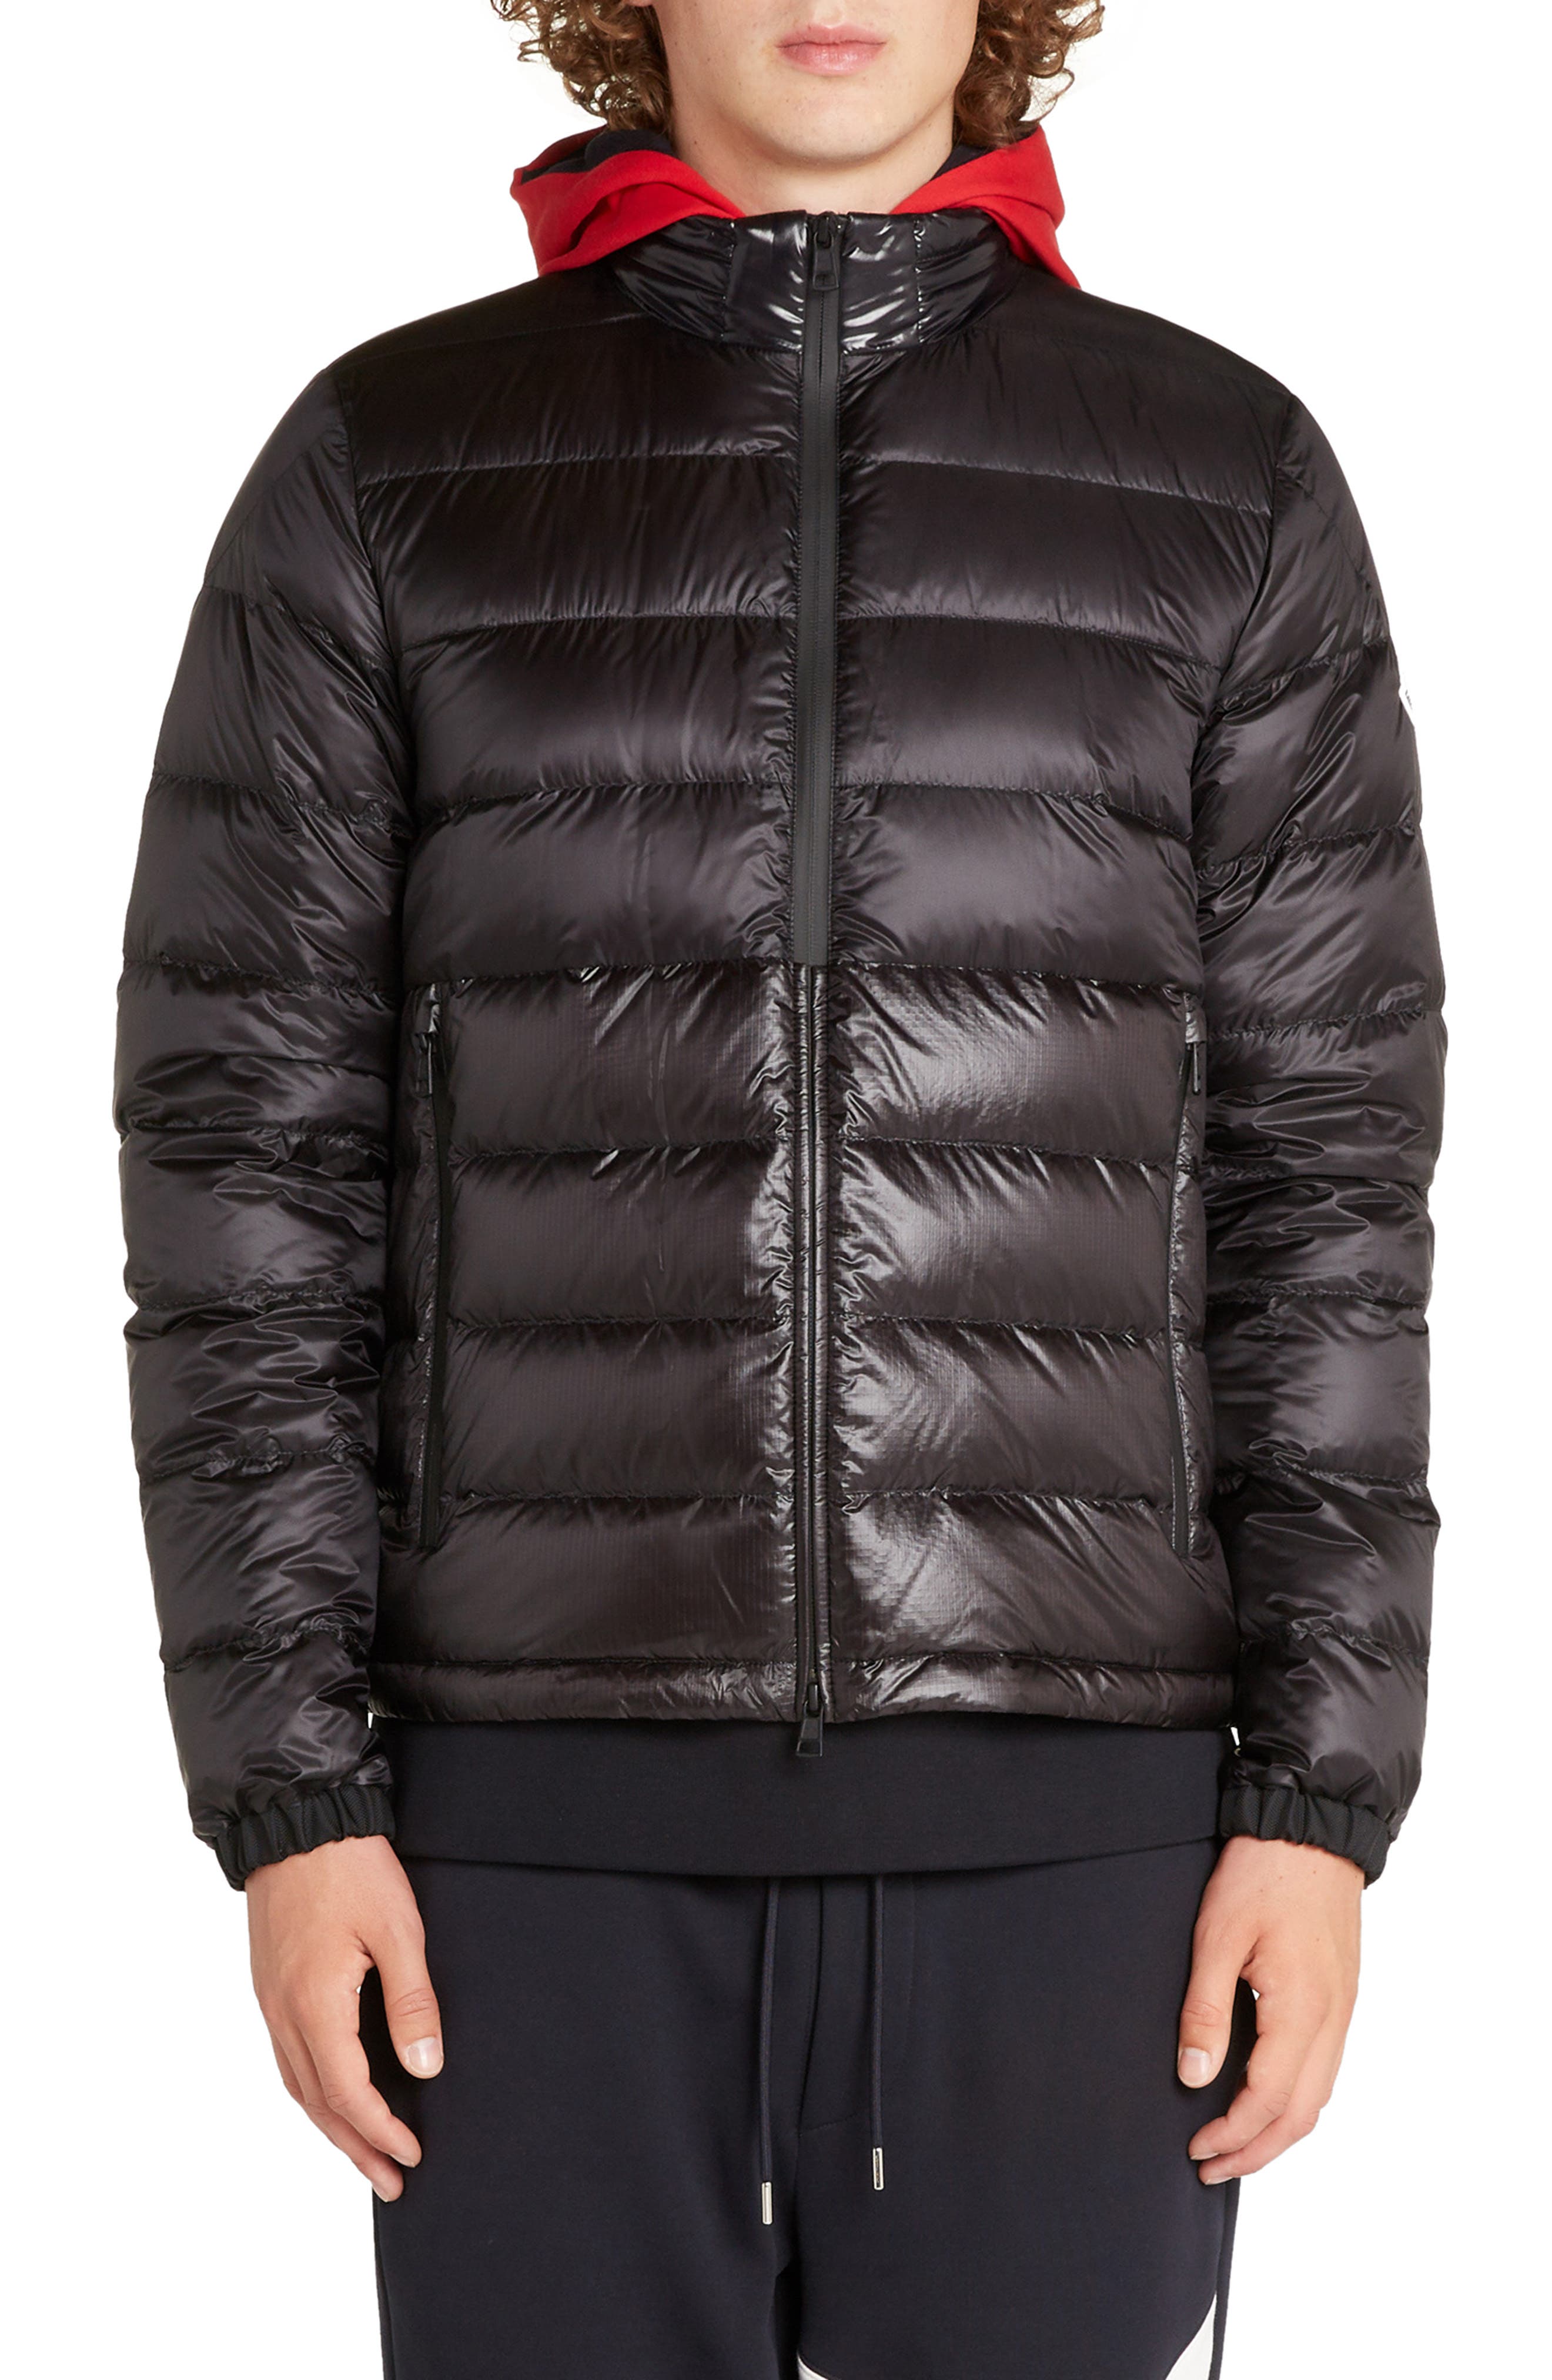 moncler jacket cost